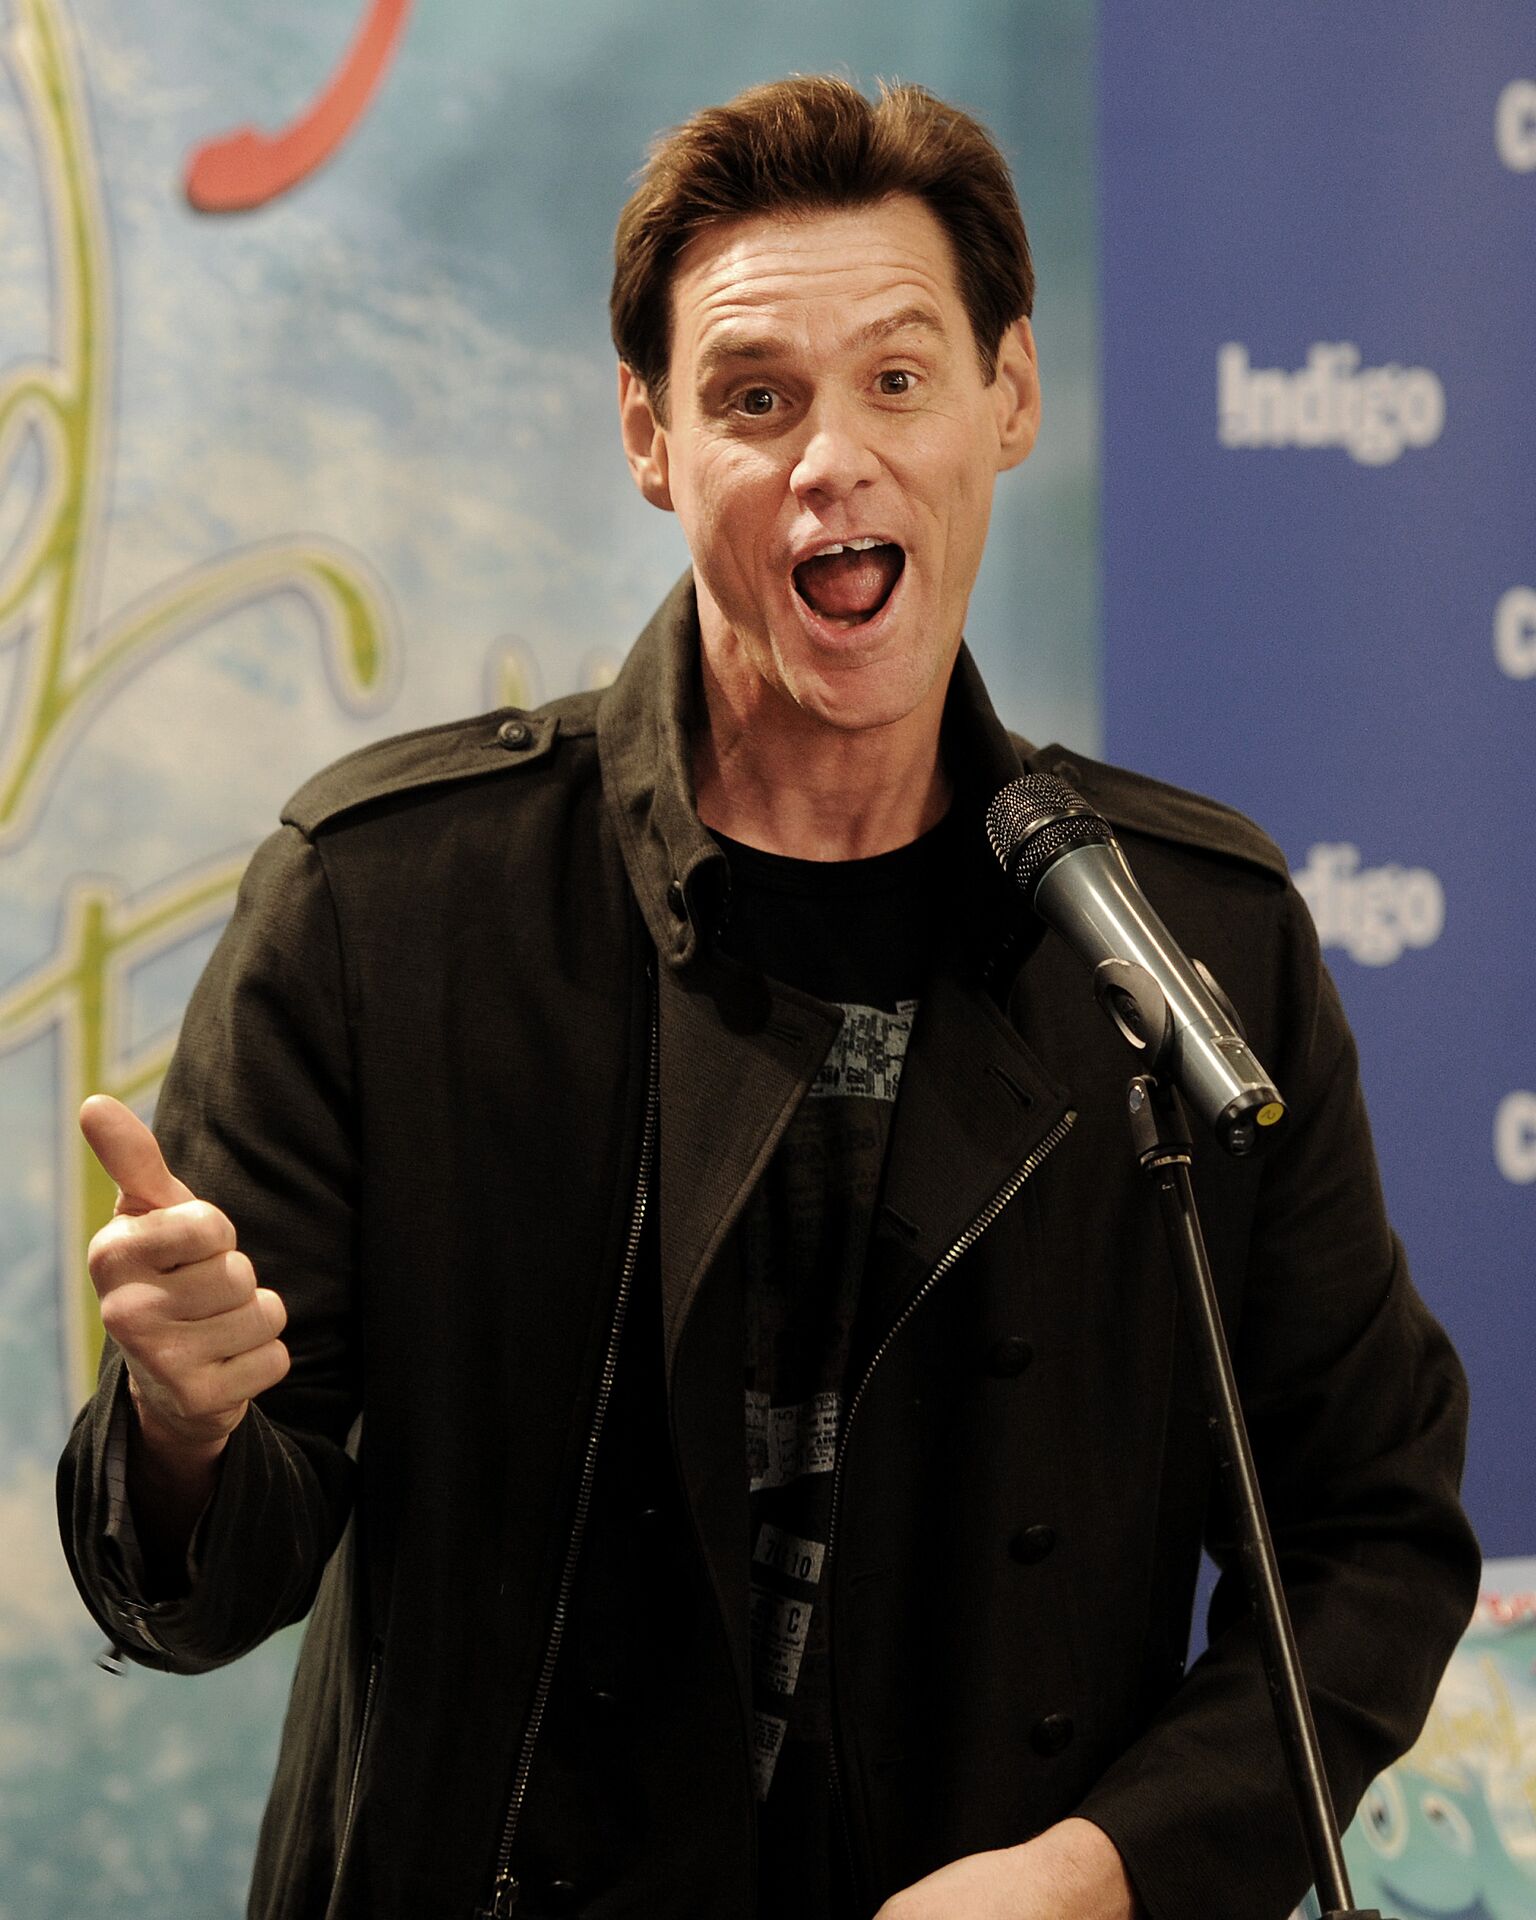 Jim Carrey hosts a signing for his children's book 'How Roland Rolls' at Indigo at Yorkdale Mall | Getty Images